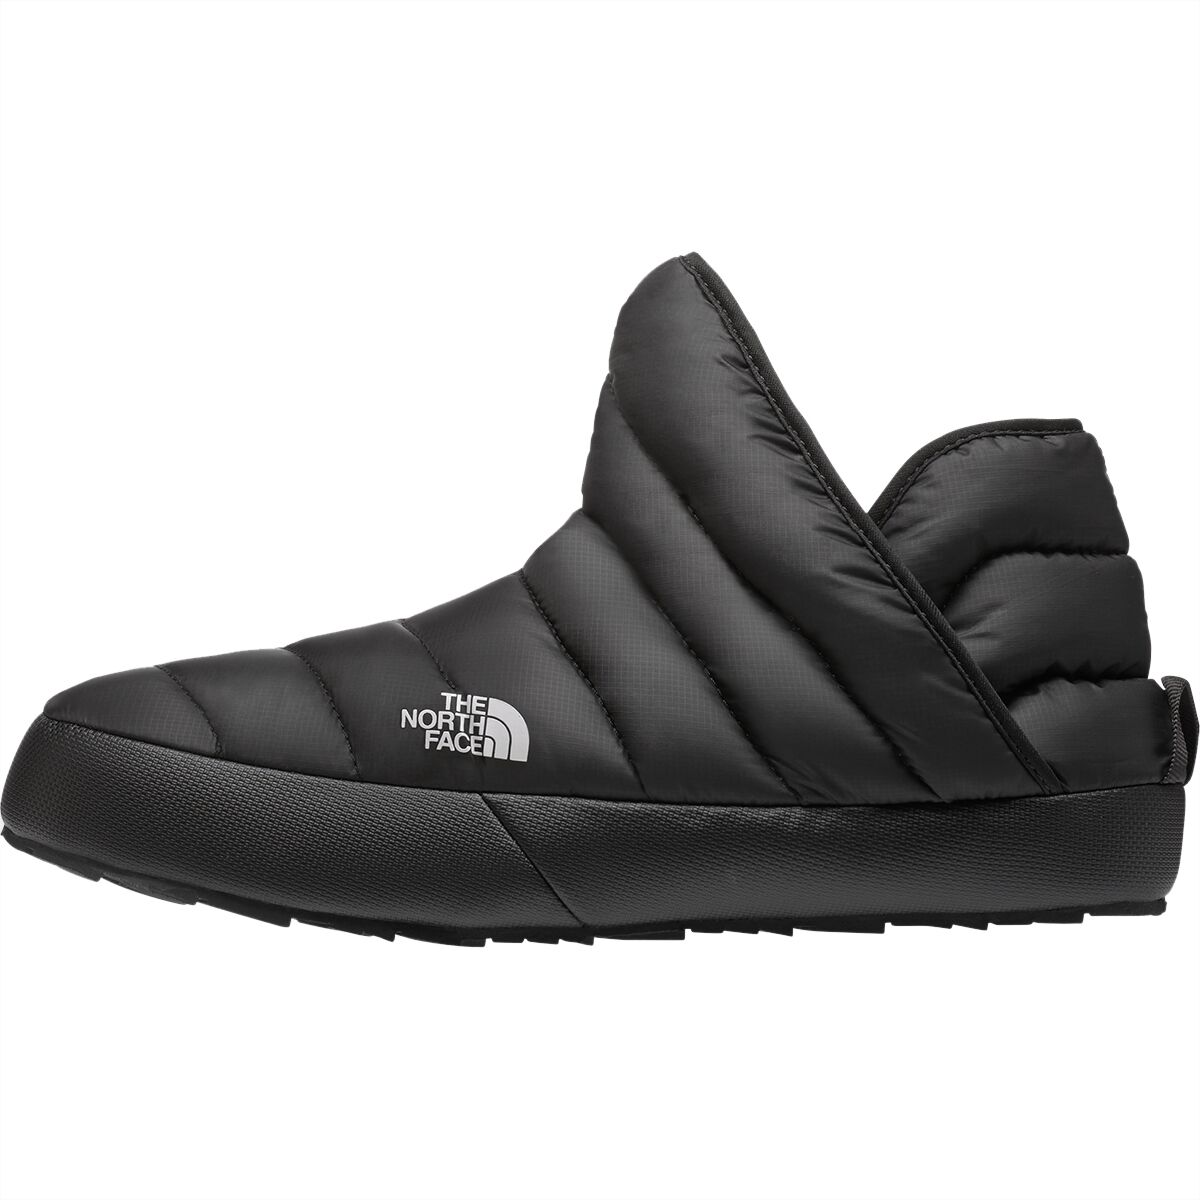 The North Face ThermoBall Eco Traction Bootie - Men's